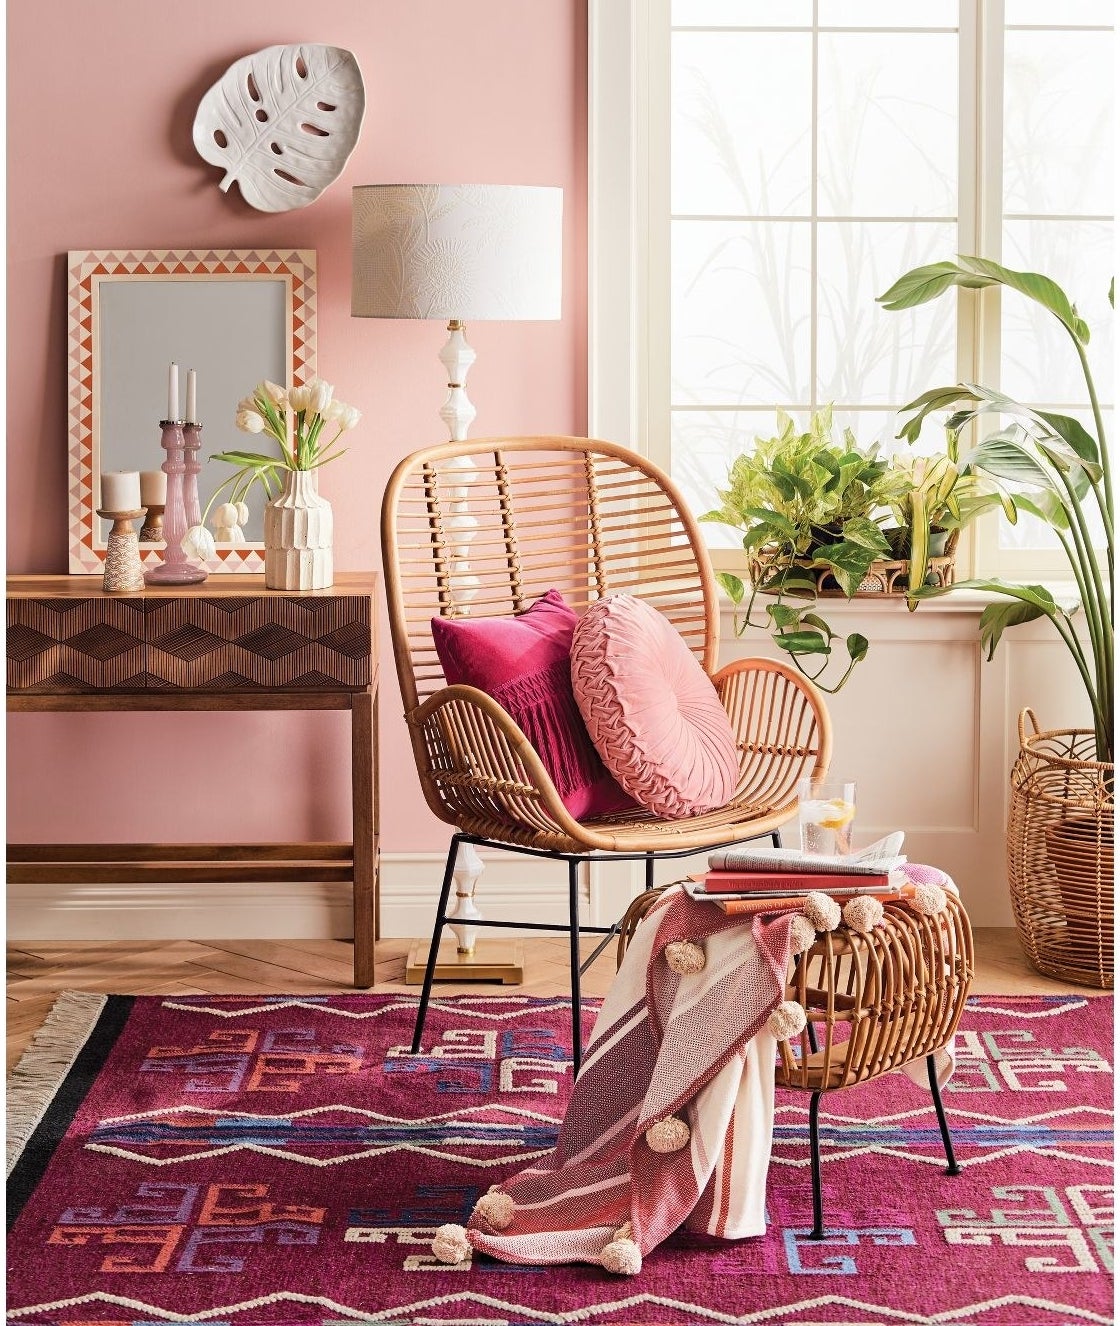 rattan arm chair with pink pillows on top next to a matching ottoman